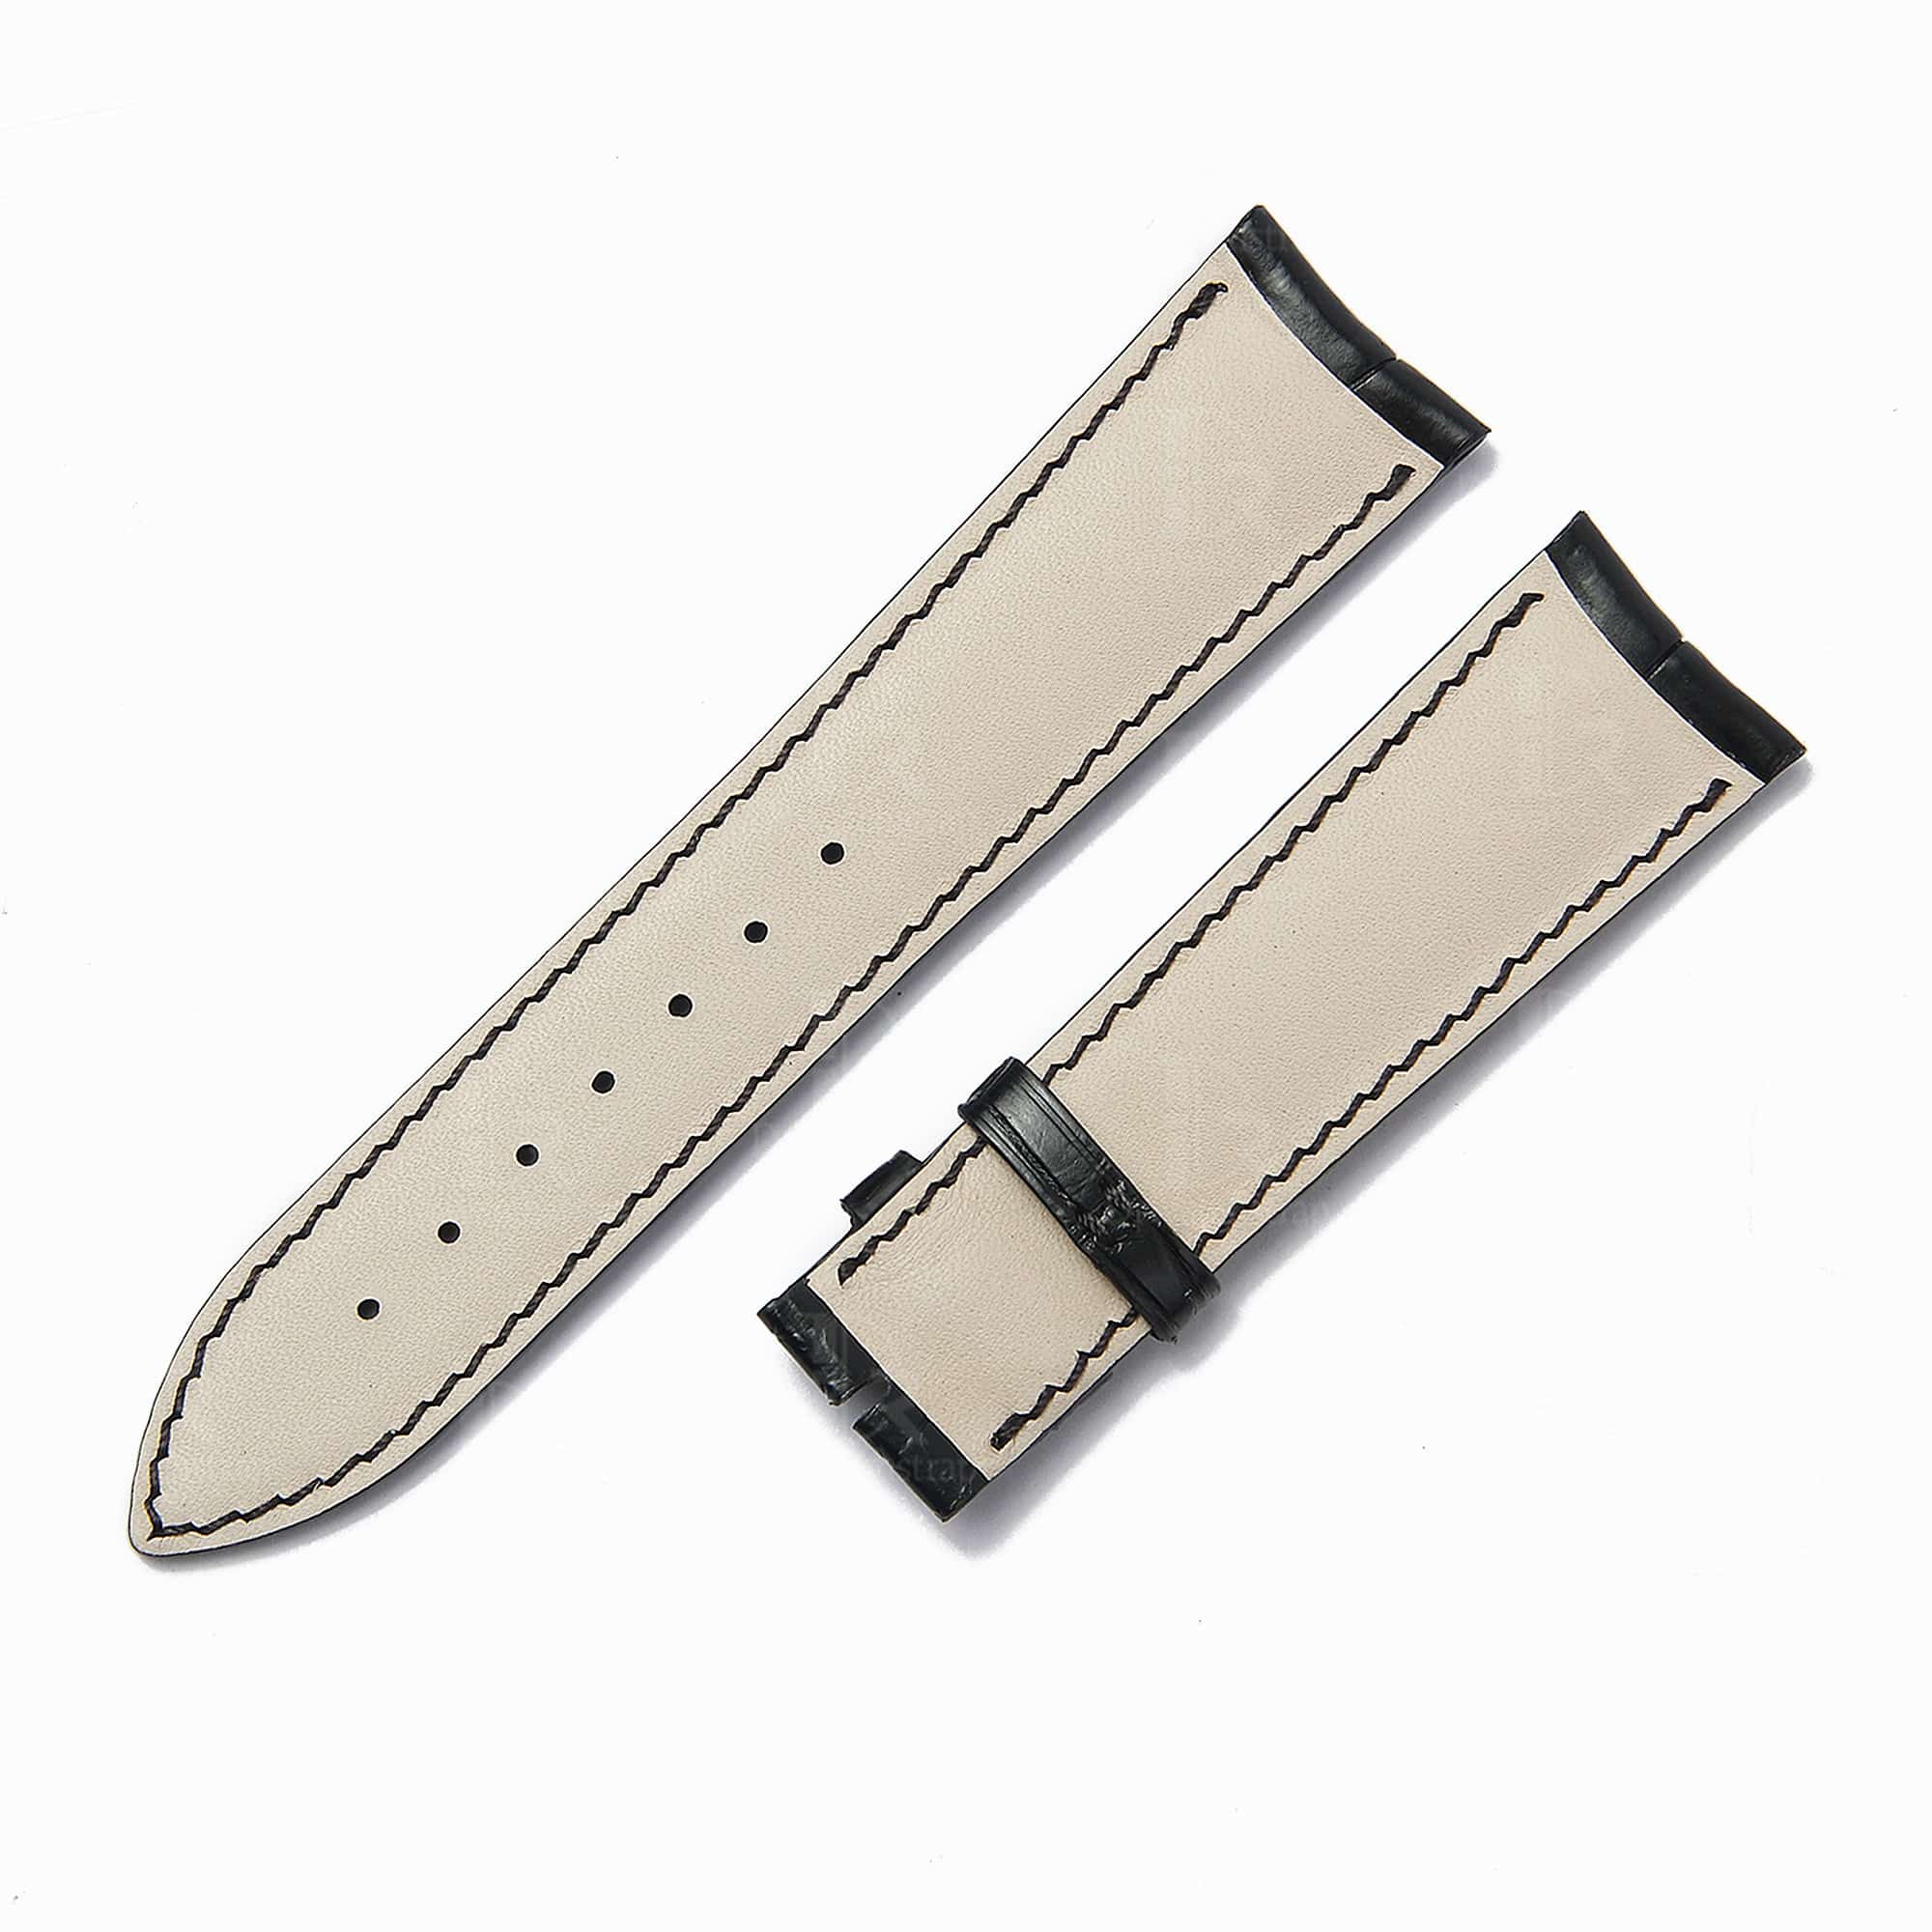 Custom alligator leather jaeger lecoultre watch bands for JLC Master watches - 19mm 20mm 21mm curved end strap